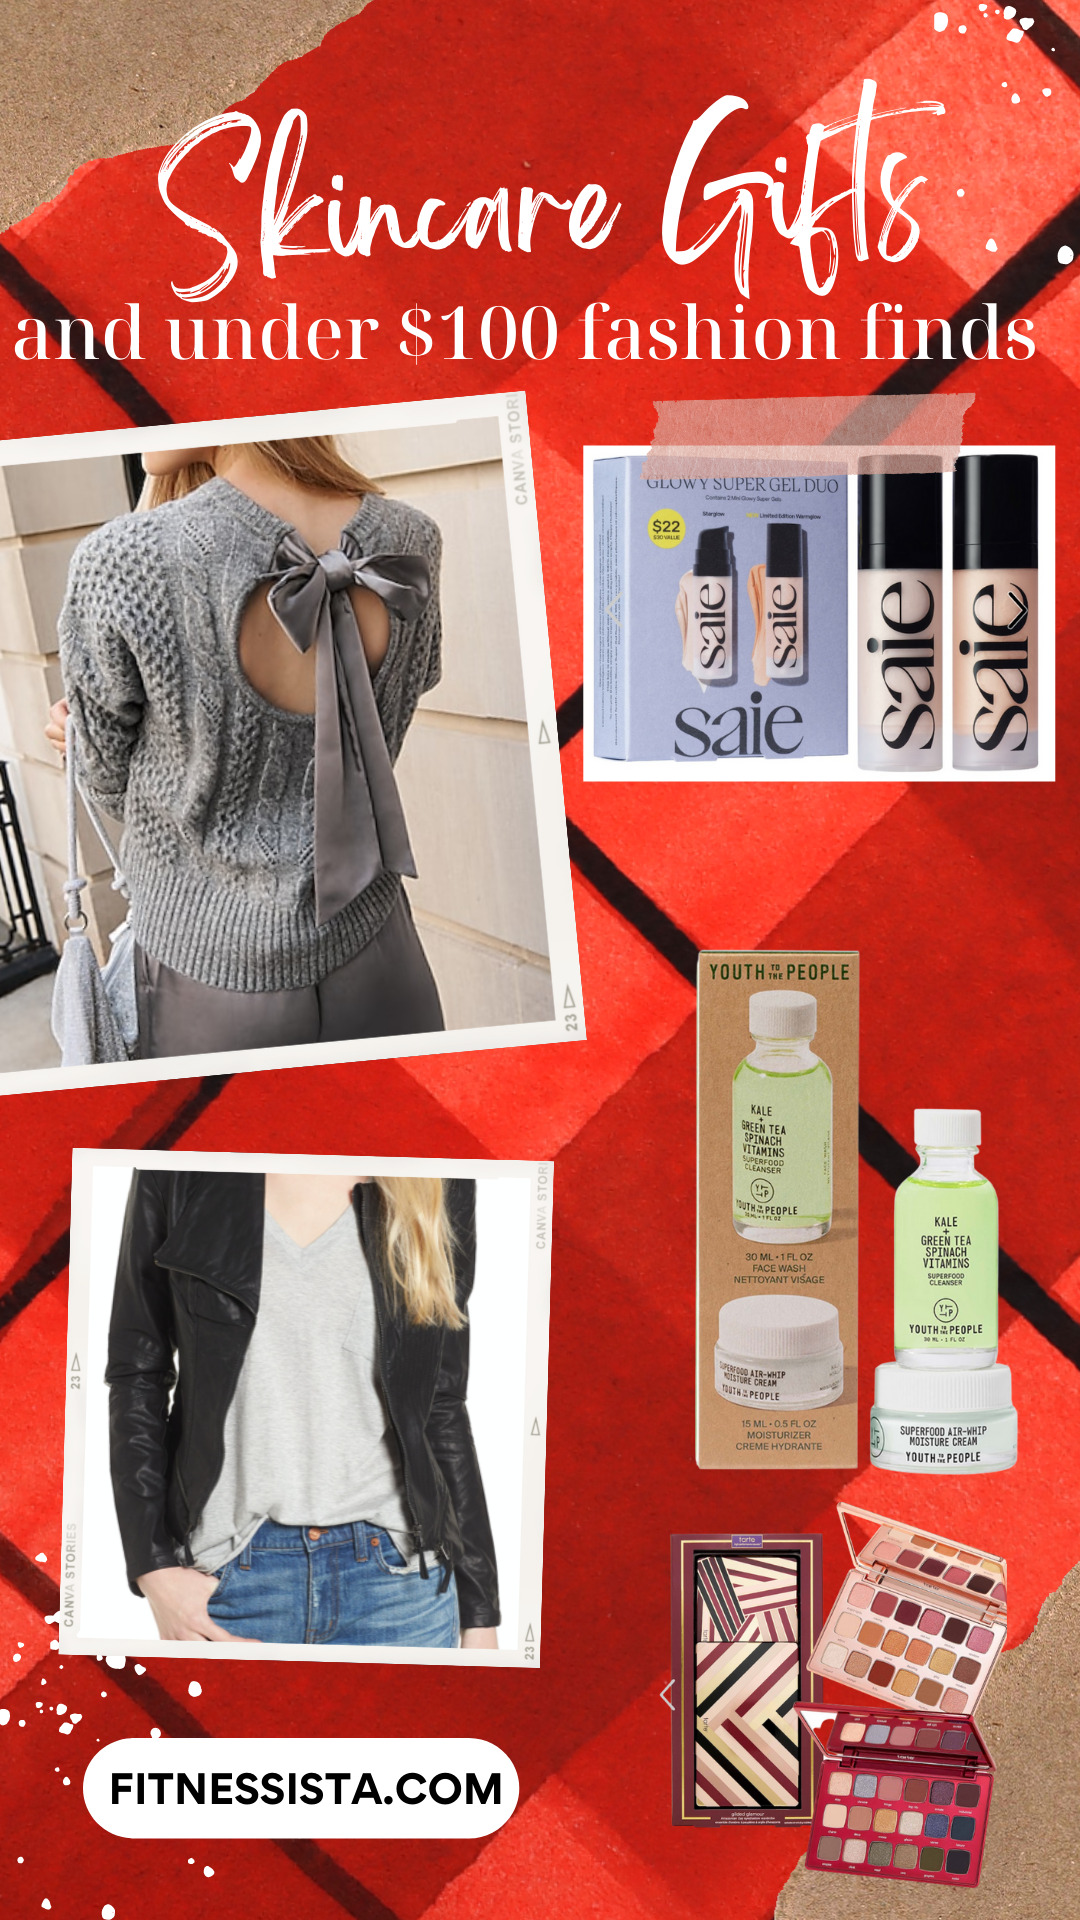 Fitness Gifts for Valentine's Day - The Fitnessista